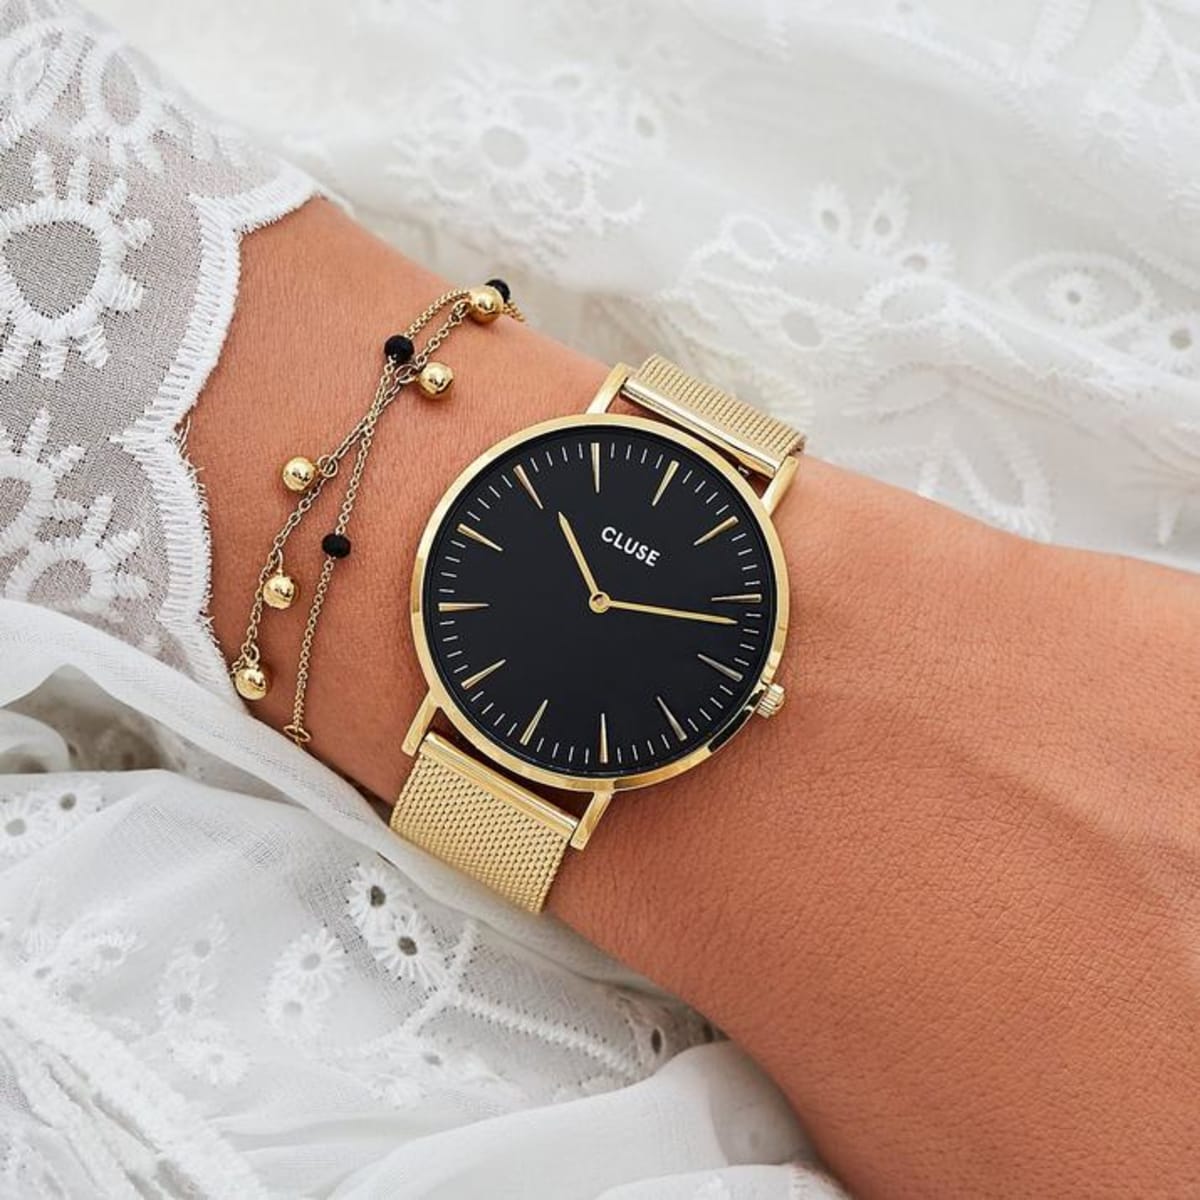 This Boho Chic model features an ultrathin case with a 38 mm diameter, crafted with precision. Black and gold are combined with a refined stainless steel mesh strap. The strap is easily interchangeable, allowing you to personalise your watch.